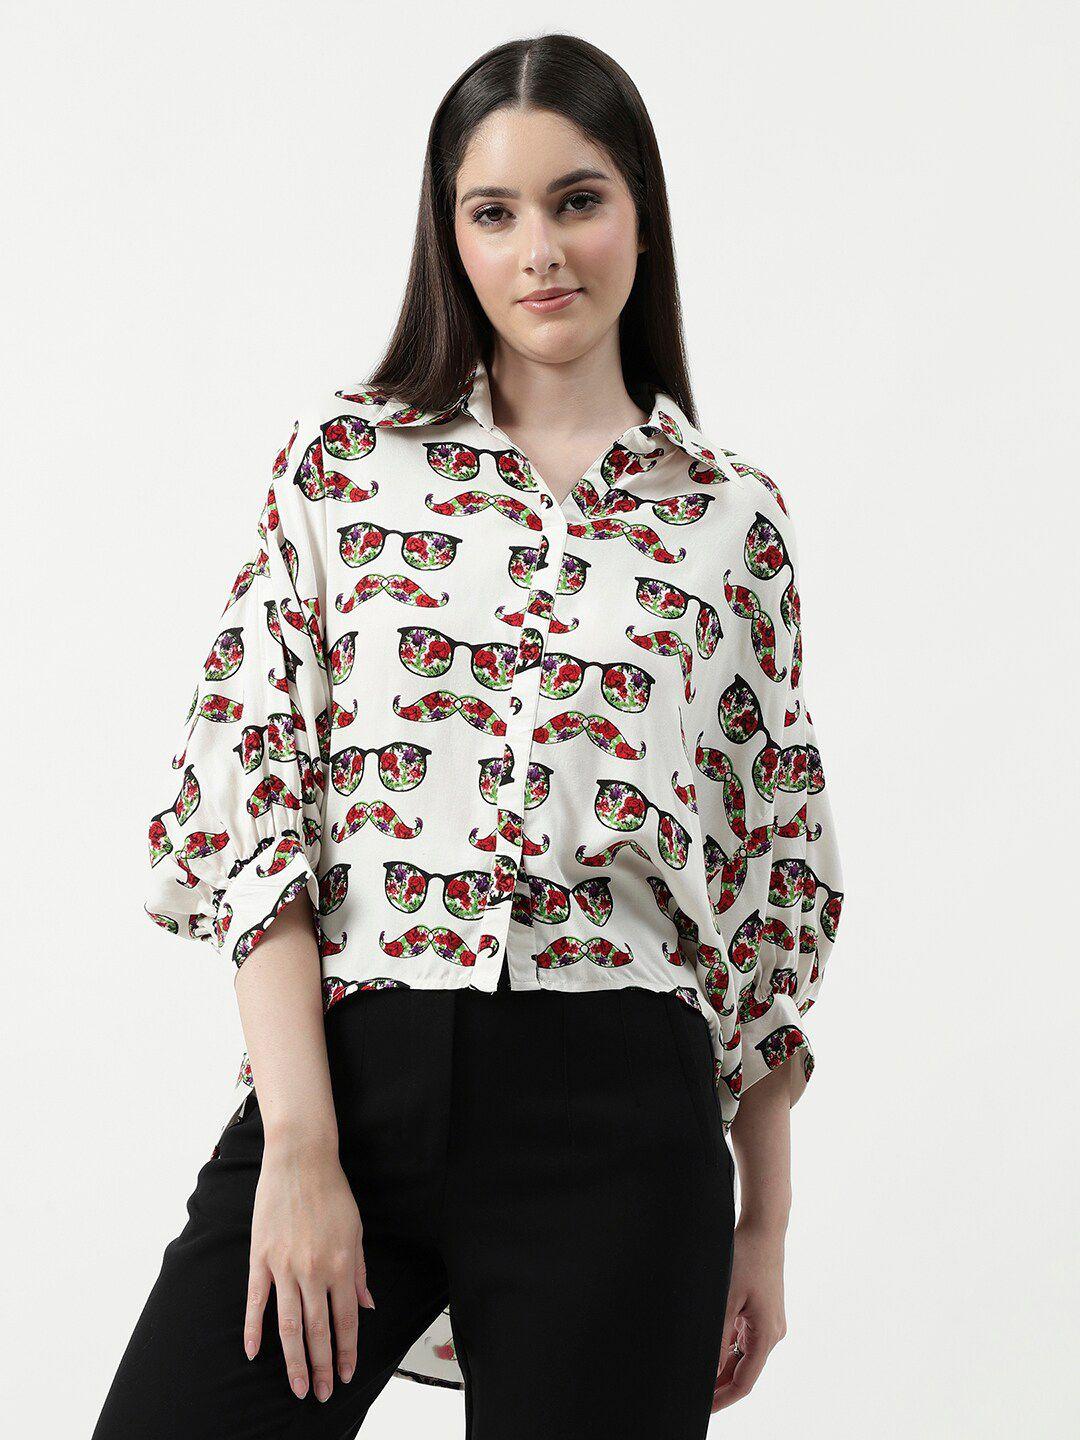 pannkh conversational printed high-low shirt style top